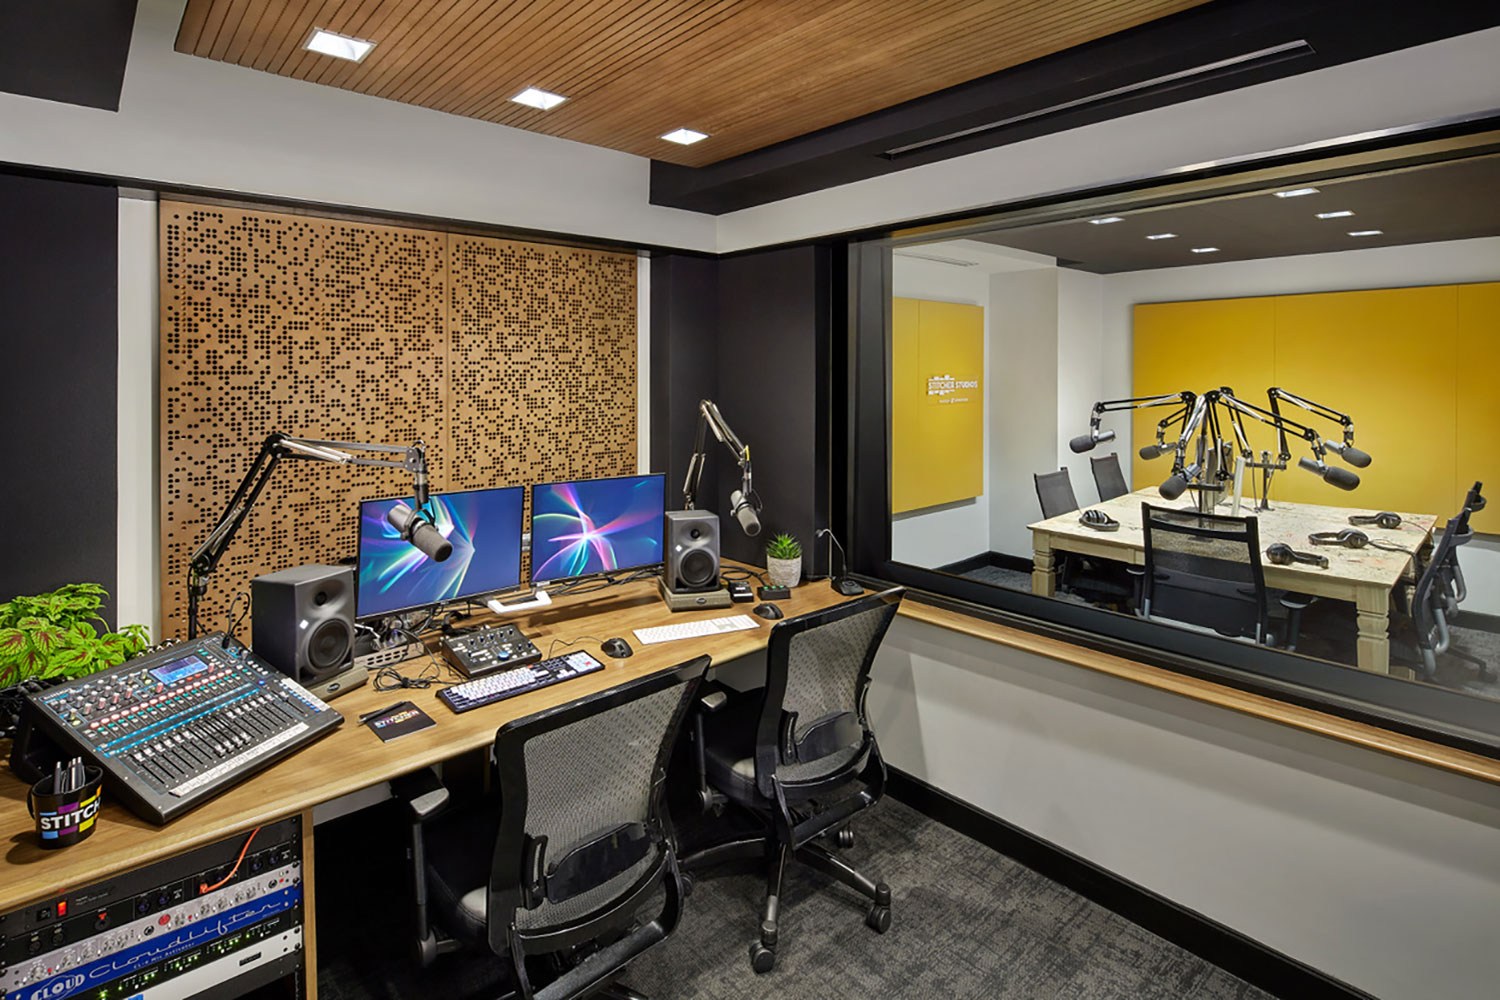 Stitcher is among the earliest, the most creative and most successful podcast creator companies. Their team made a move to build out larger production facilities in both its NY and LA offices and they chose WSDG to design their new podcast studios facilities. Control C.